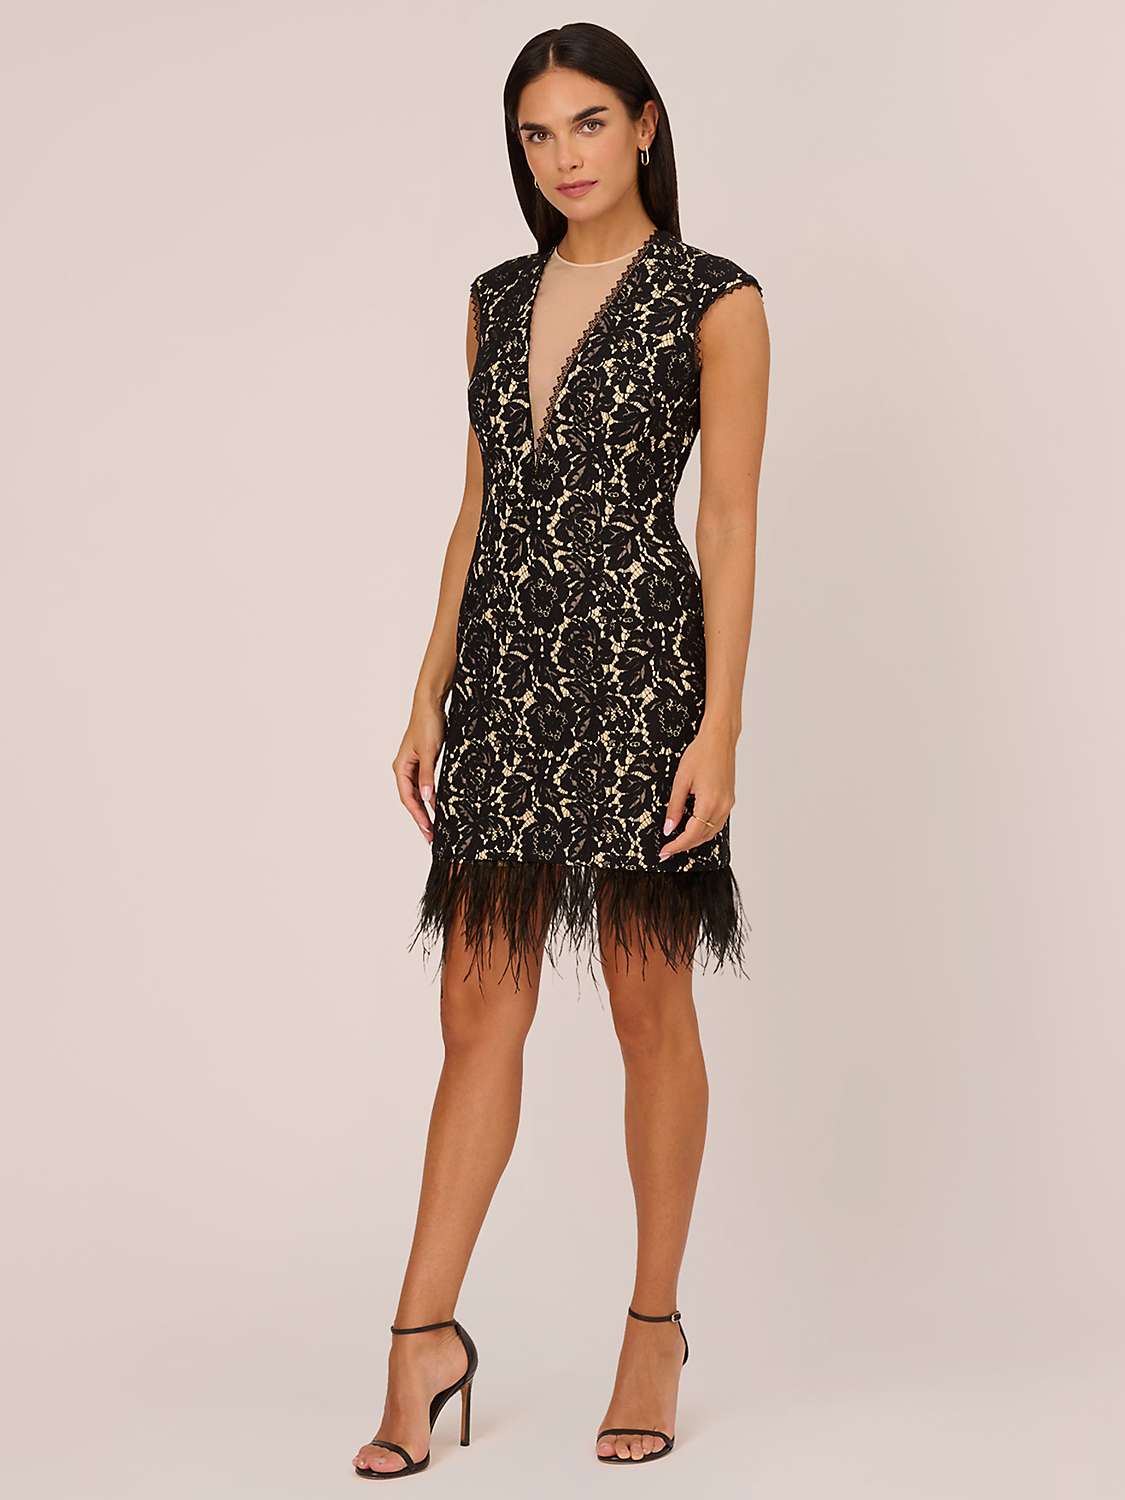 Buy Adrianna by Adrianna Papell Bonded Lace Cocktail Dress, Black/Nude Online at johnlewis.com